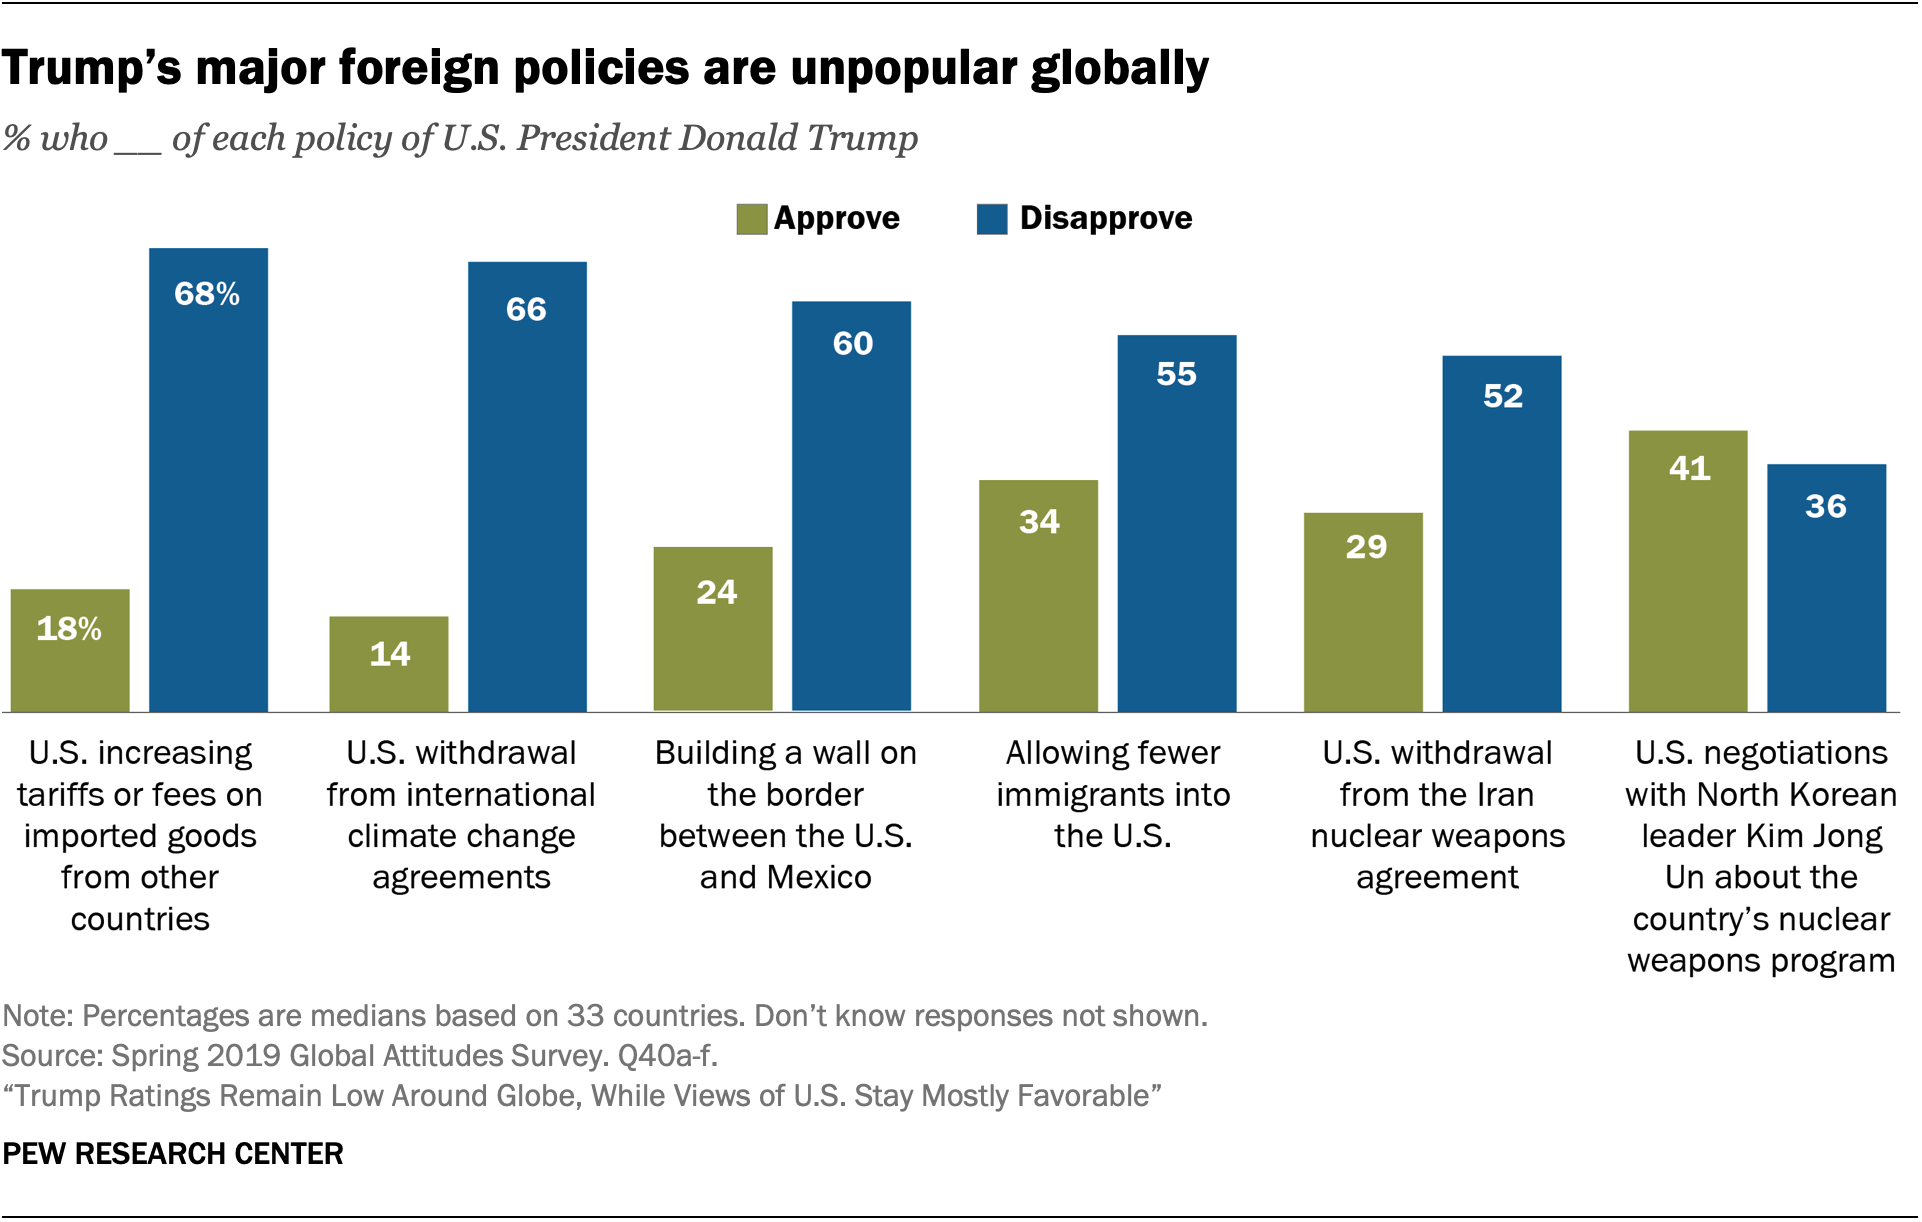 Confidence in Trump remains low internationally